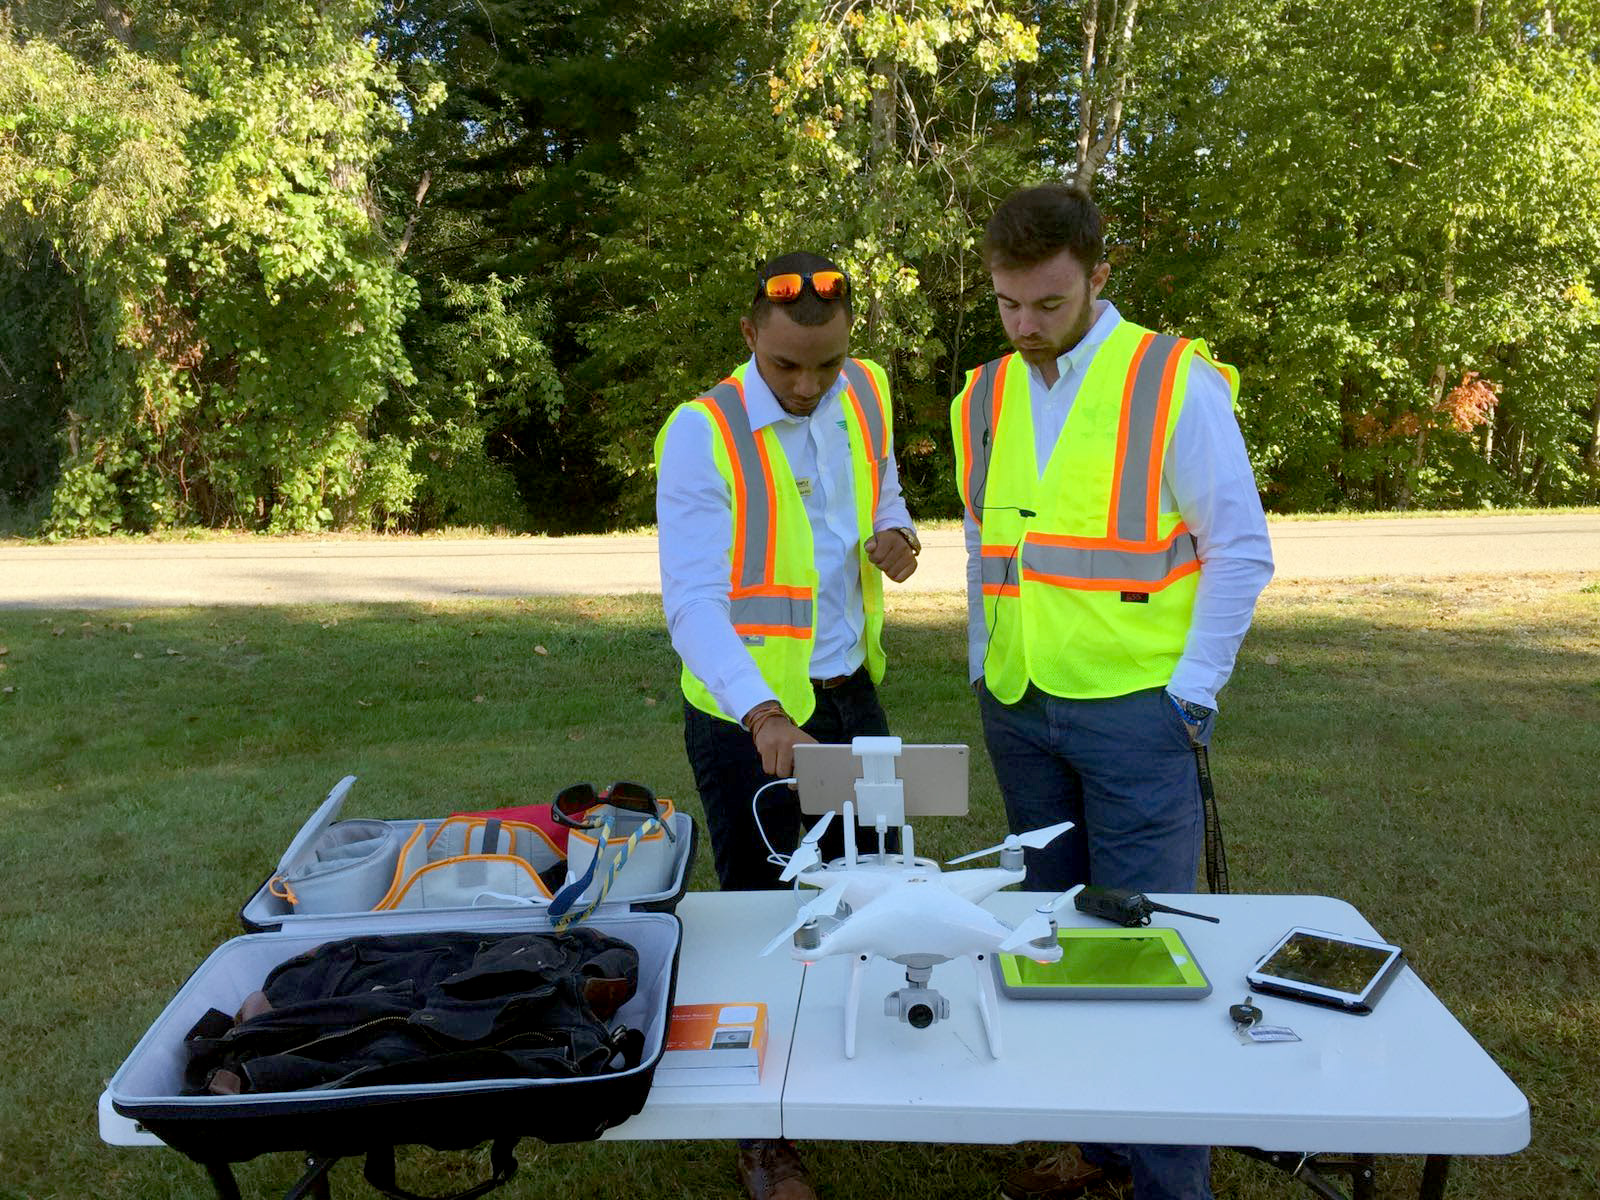 PistonFly's Miguel del Rosario, an aviation maintenance specialist, and partner Chris Desmond, a CFII and a videographer, prepare for a drone video flight. Photo courtesy of PistonFly.